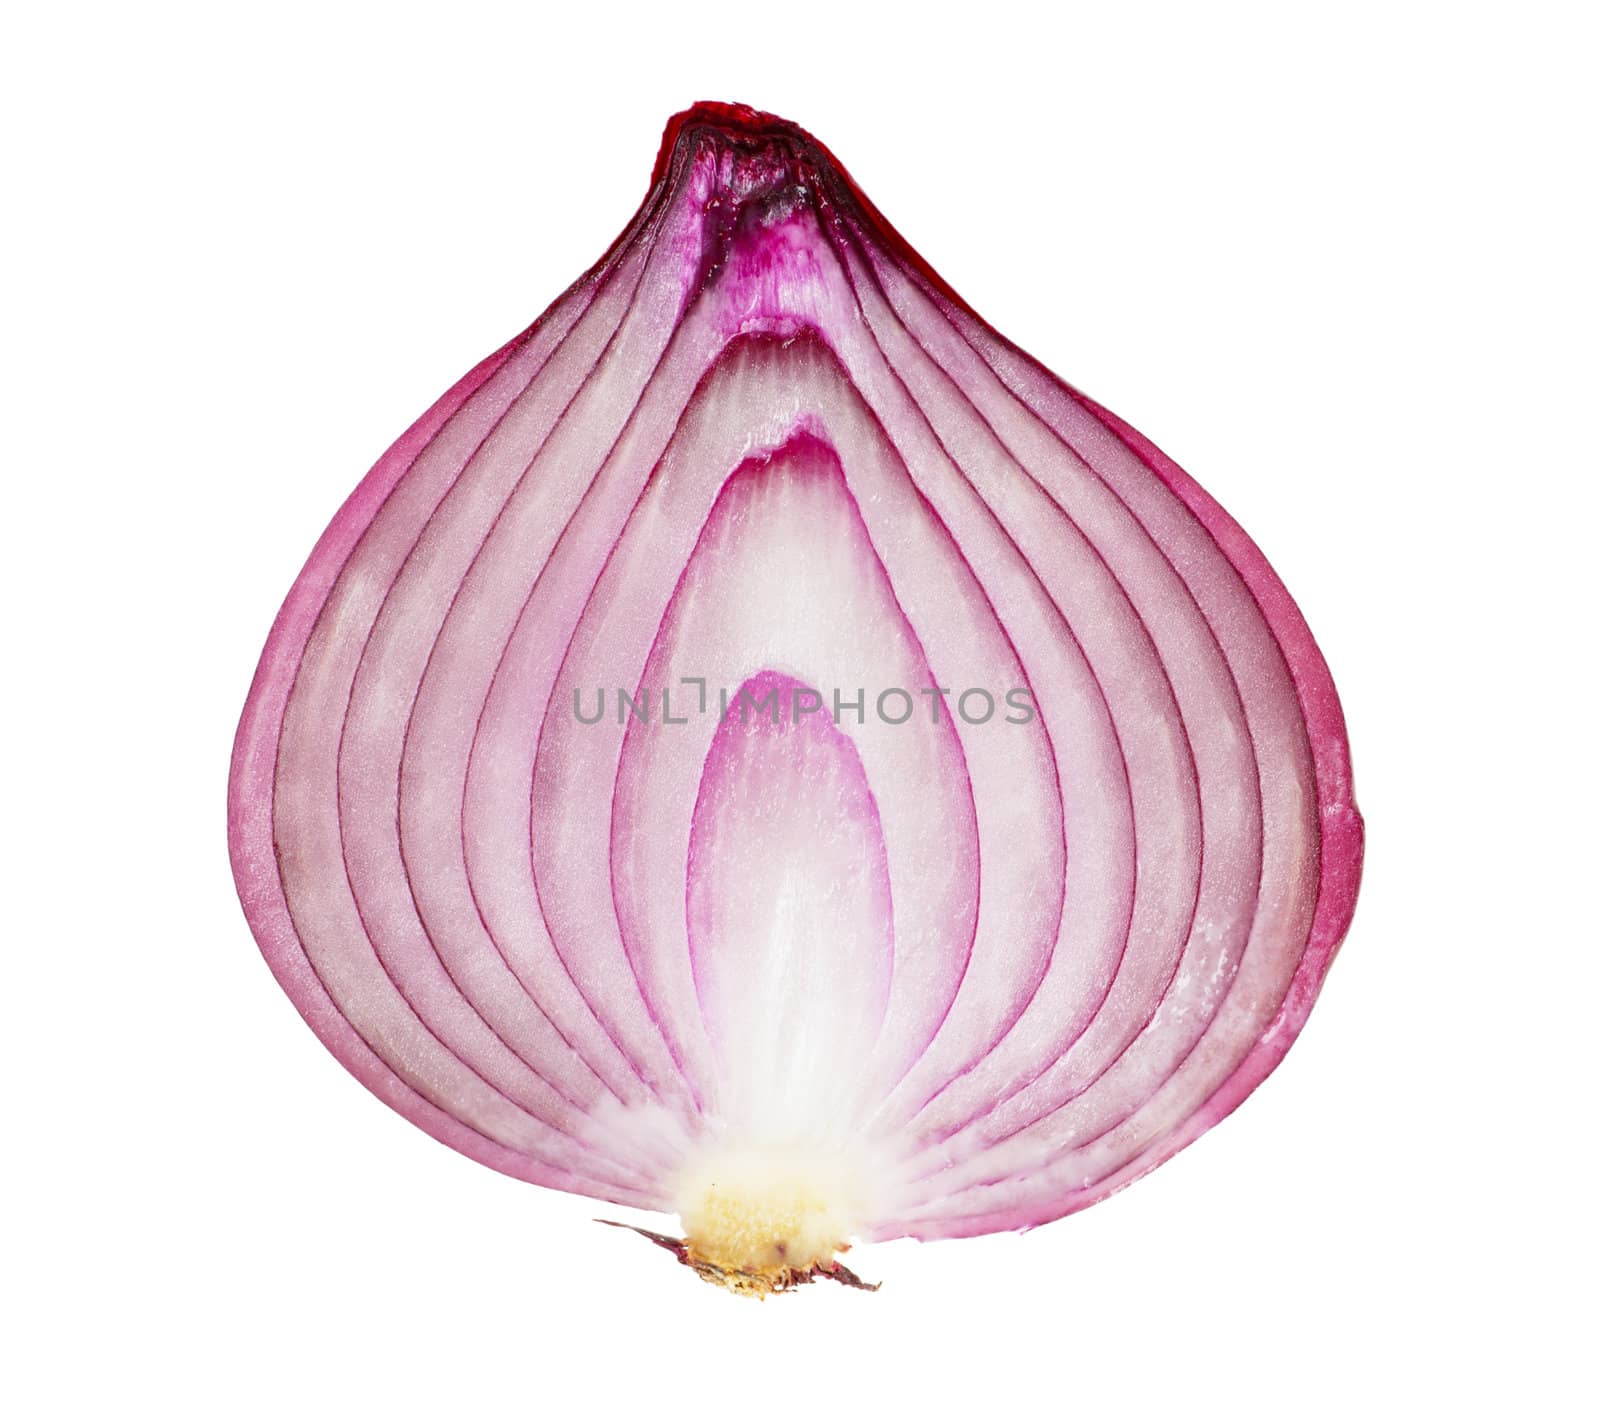 A red onion, sliced in half, isolated on white background